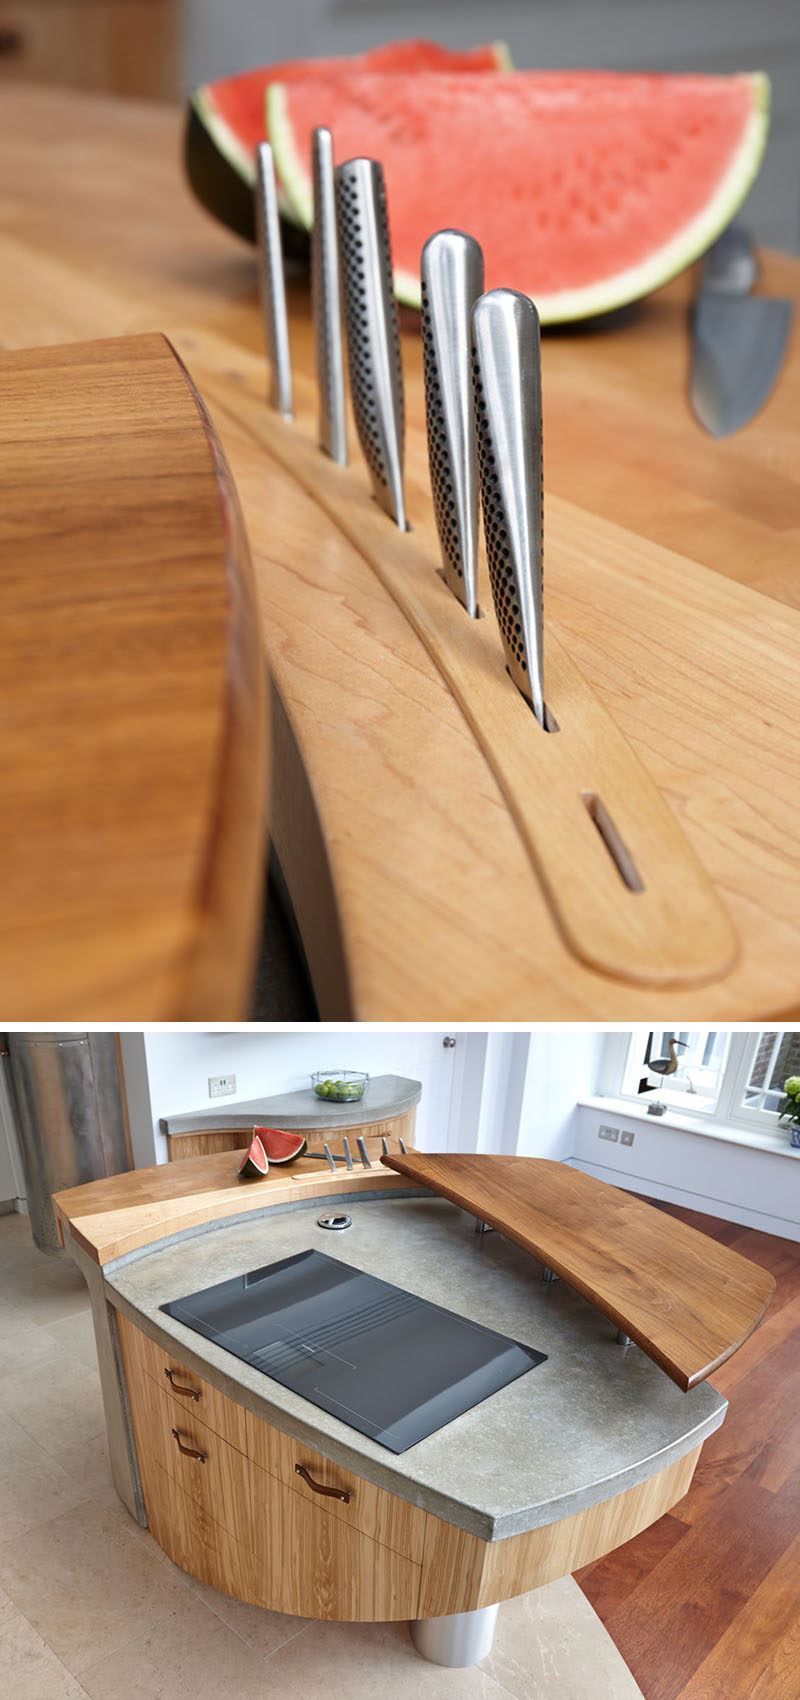 Kitchen Design Ideas - Include A Built-In Knife Block